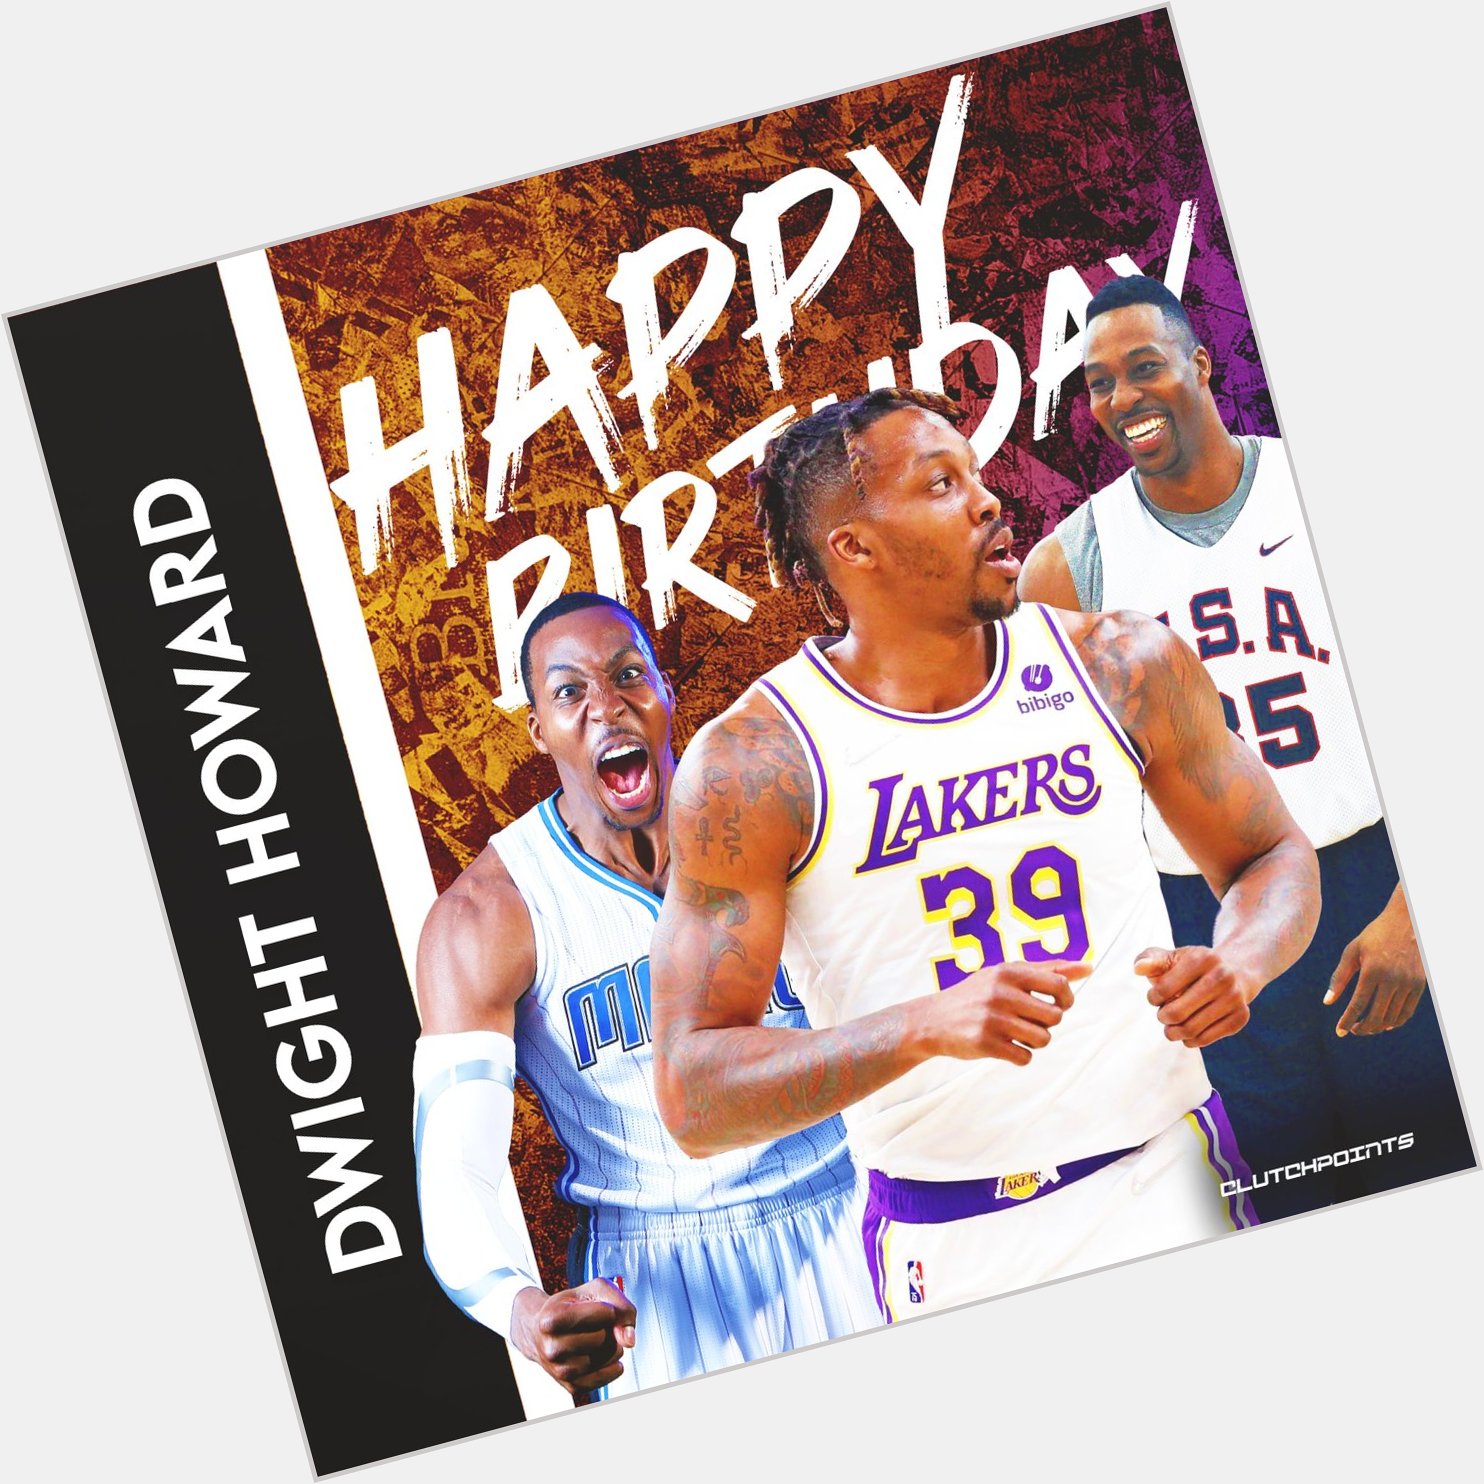 Clutchfam, join us in wishing Dwight Howard a happy 37th birthday 